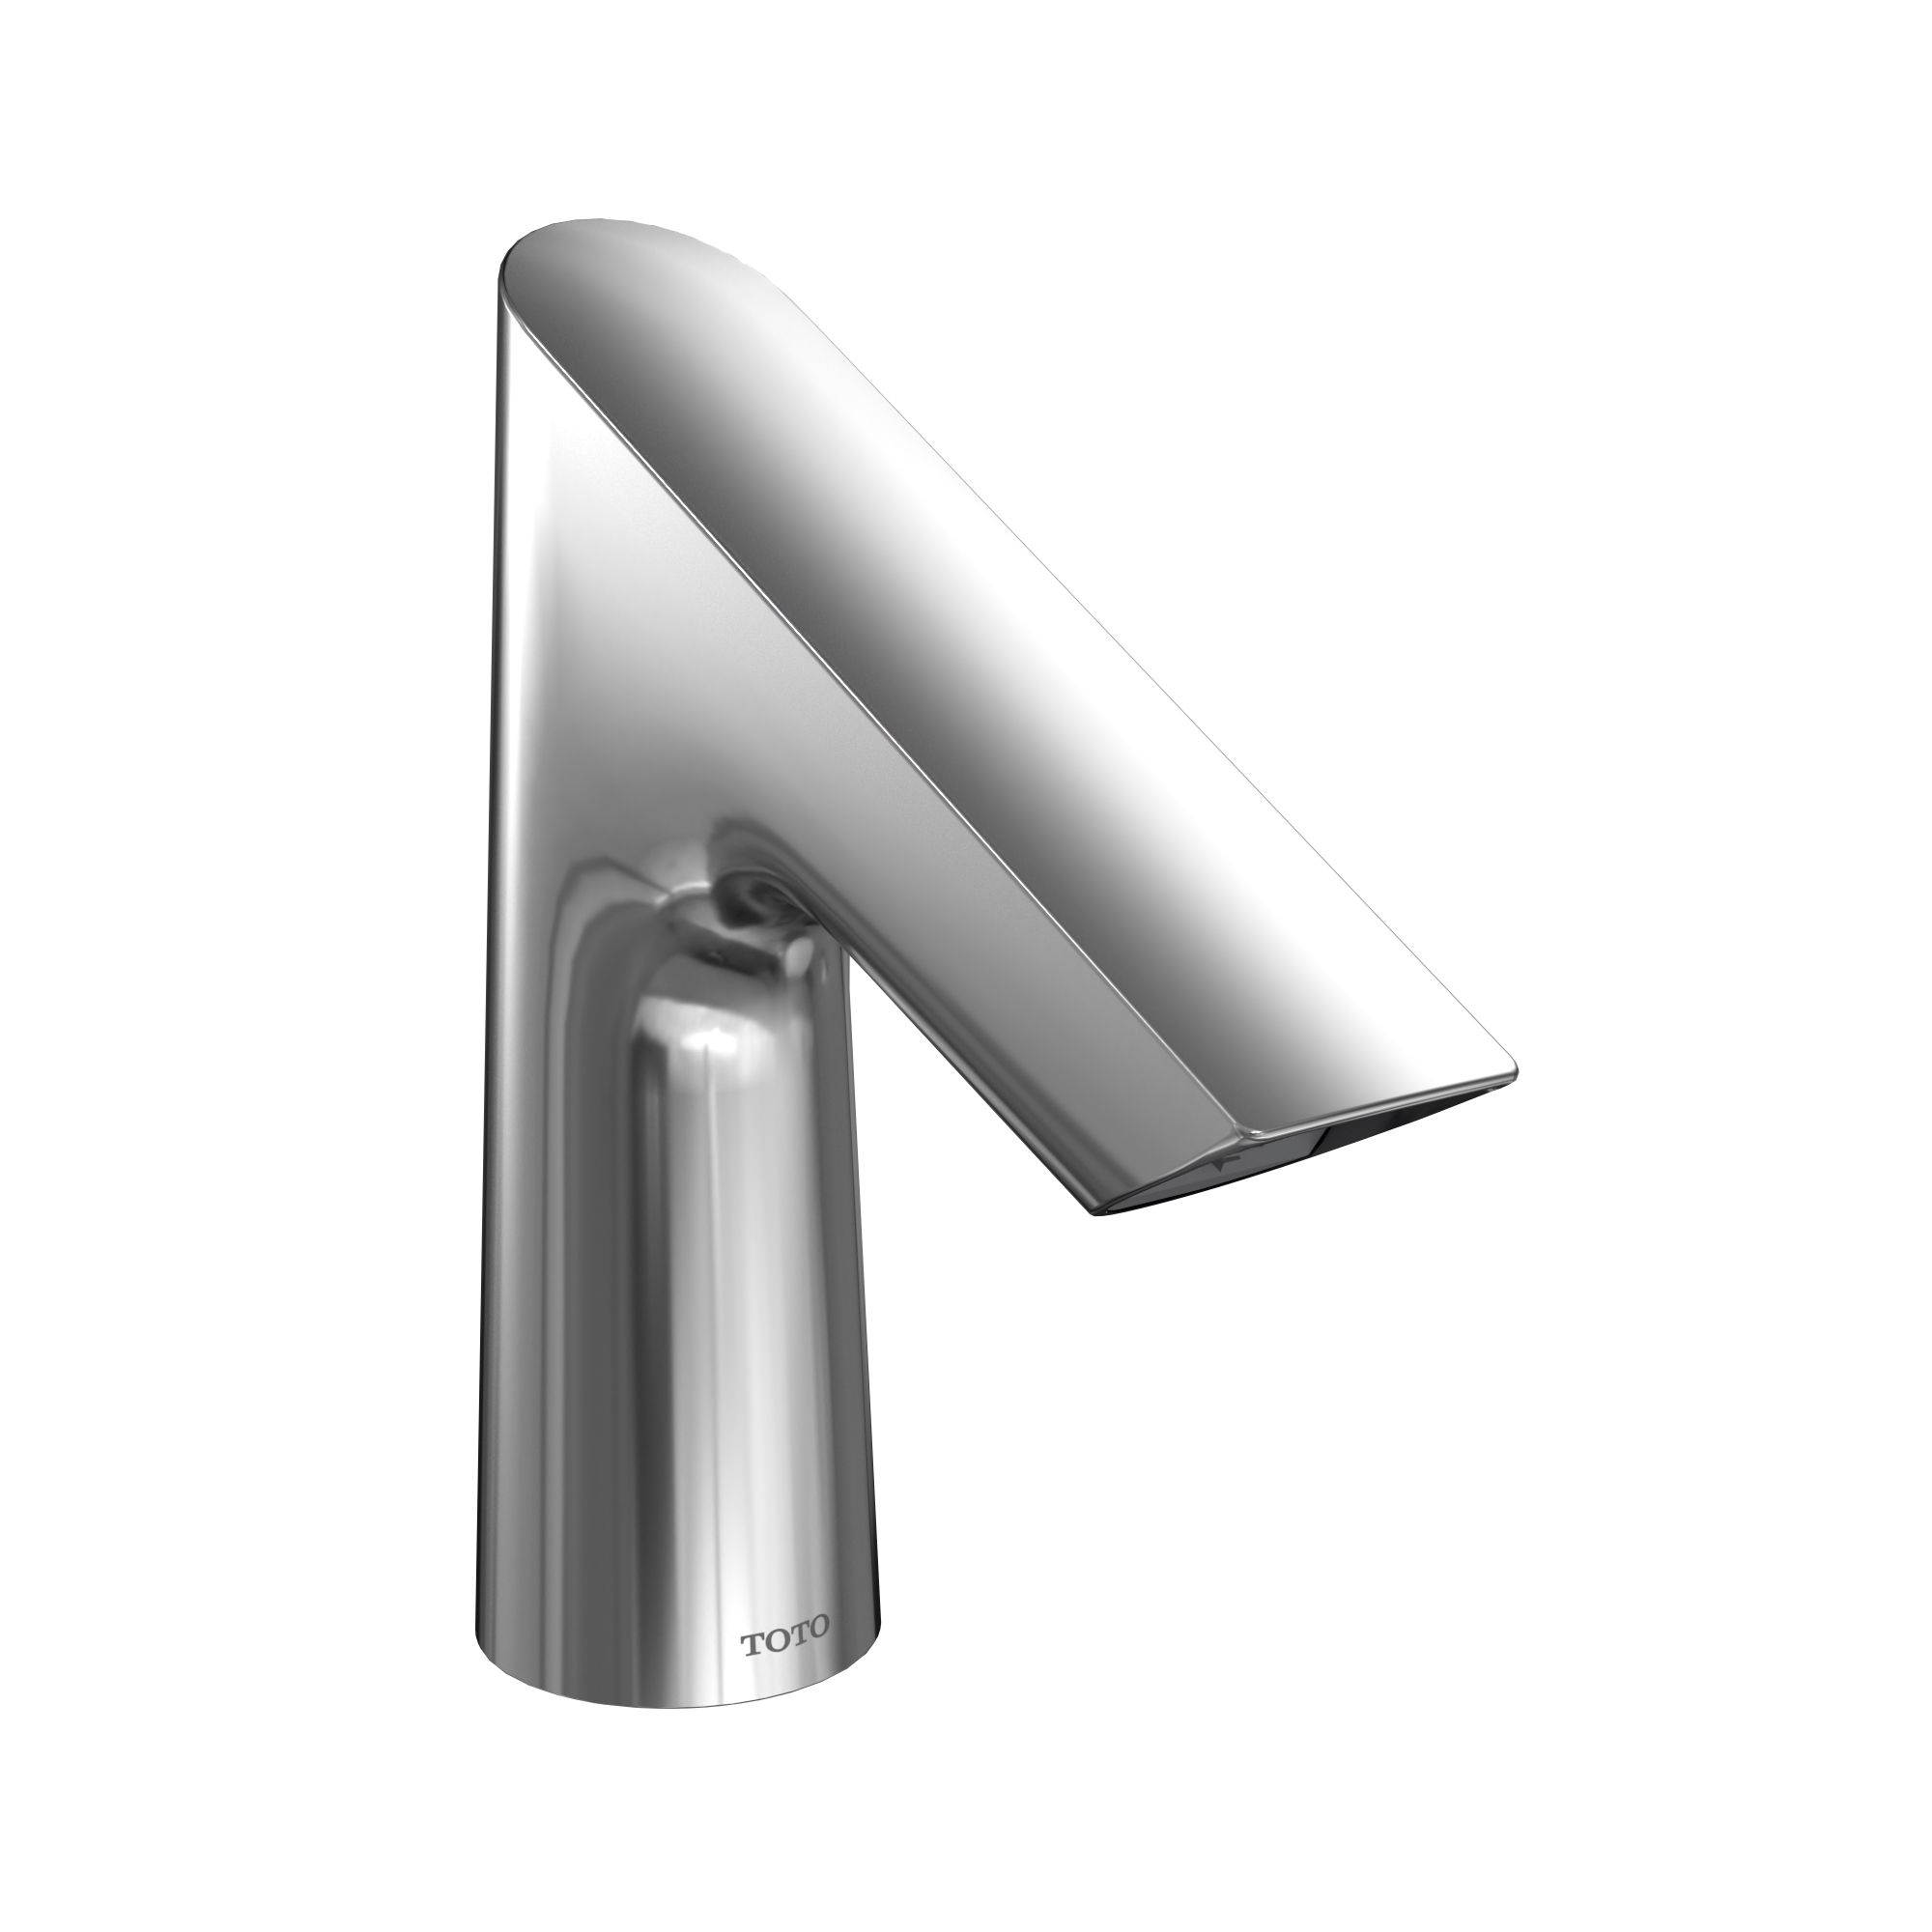 Standard-S Touchless Faucet - 1.0 GPM